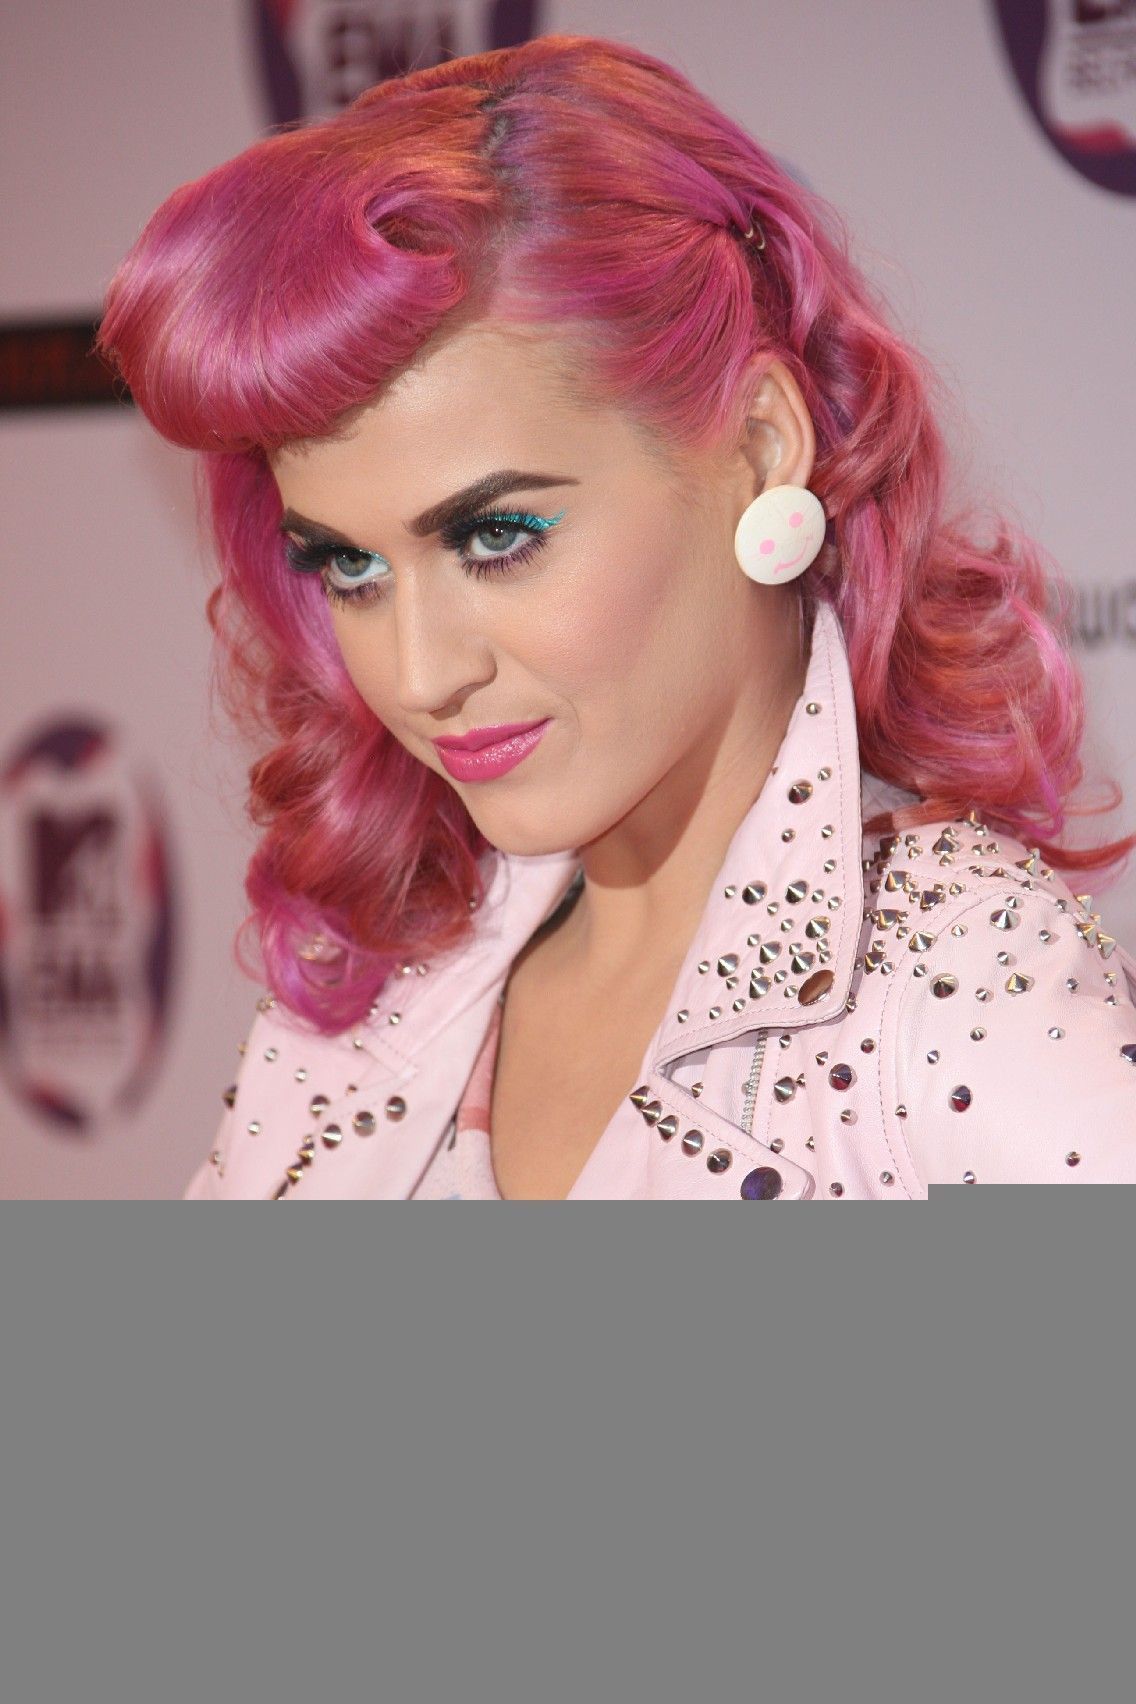 Katy Perry - The MTV Europe Music Awards 2011 (EMAs) held at the Odyssey Arena - Arrivals | Picture 118074